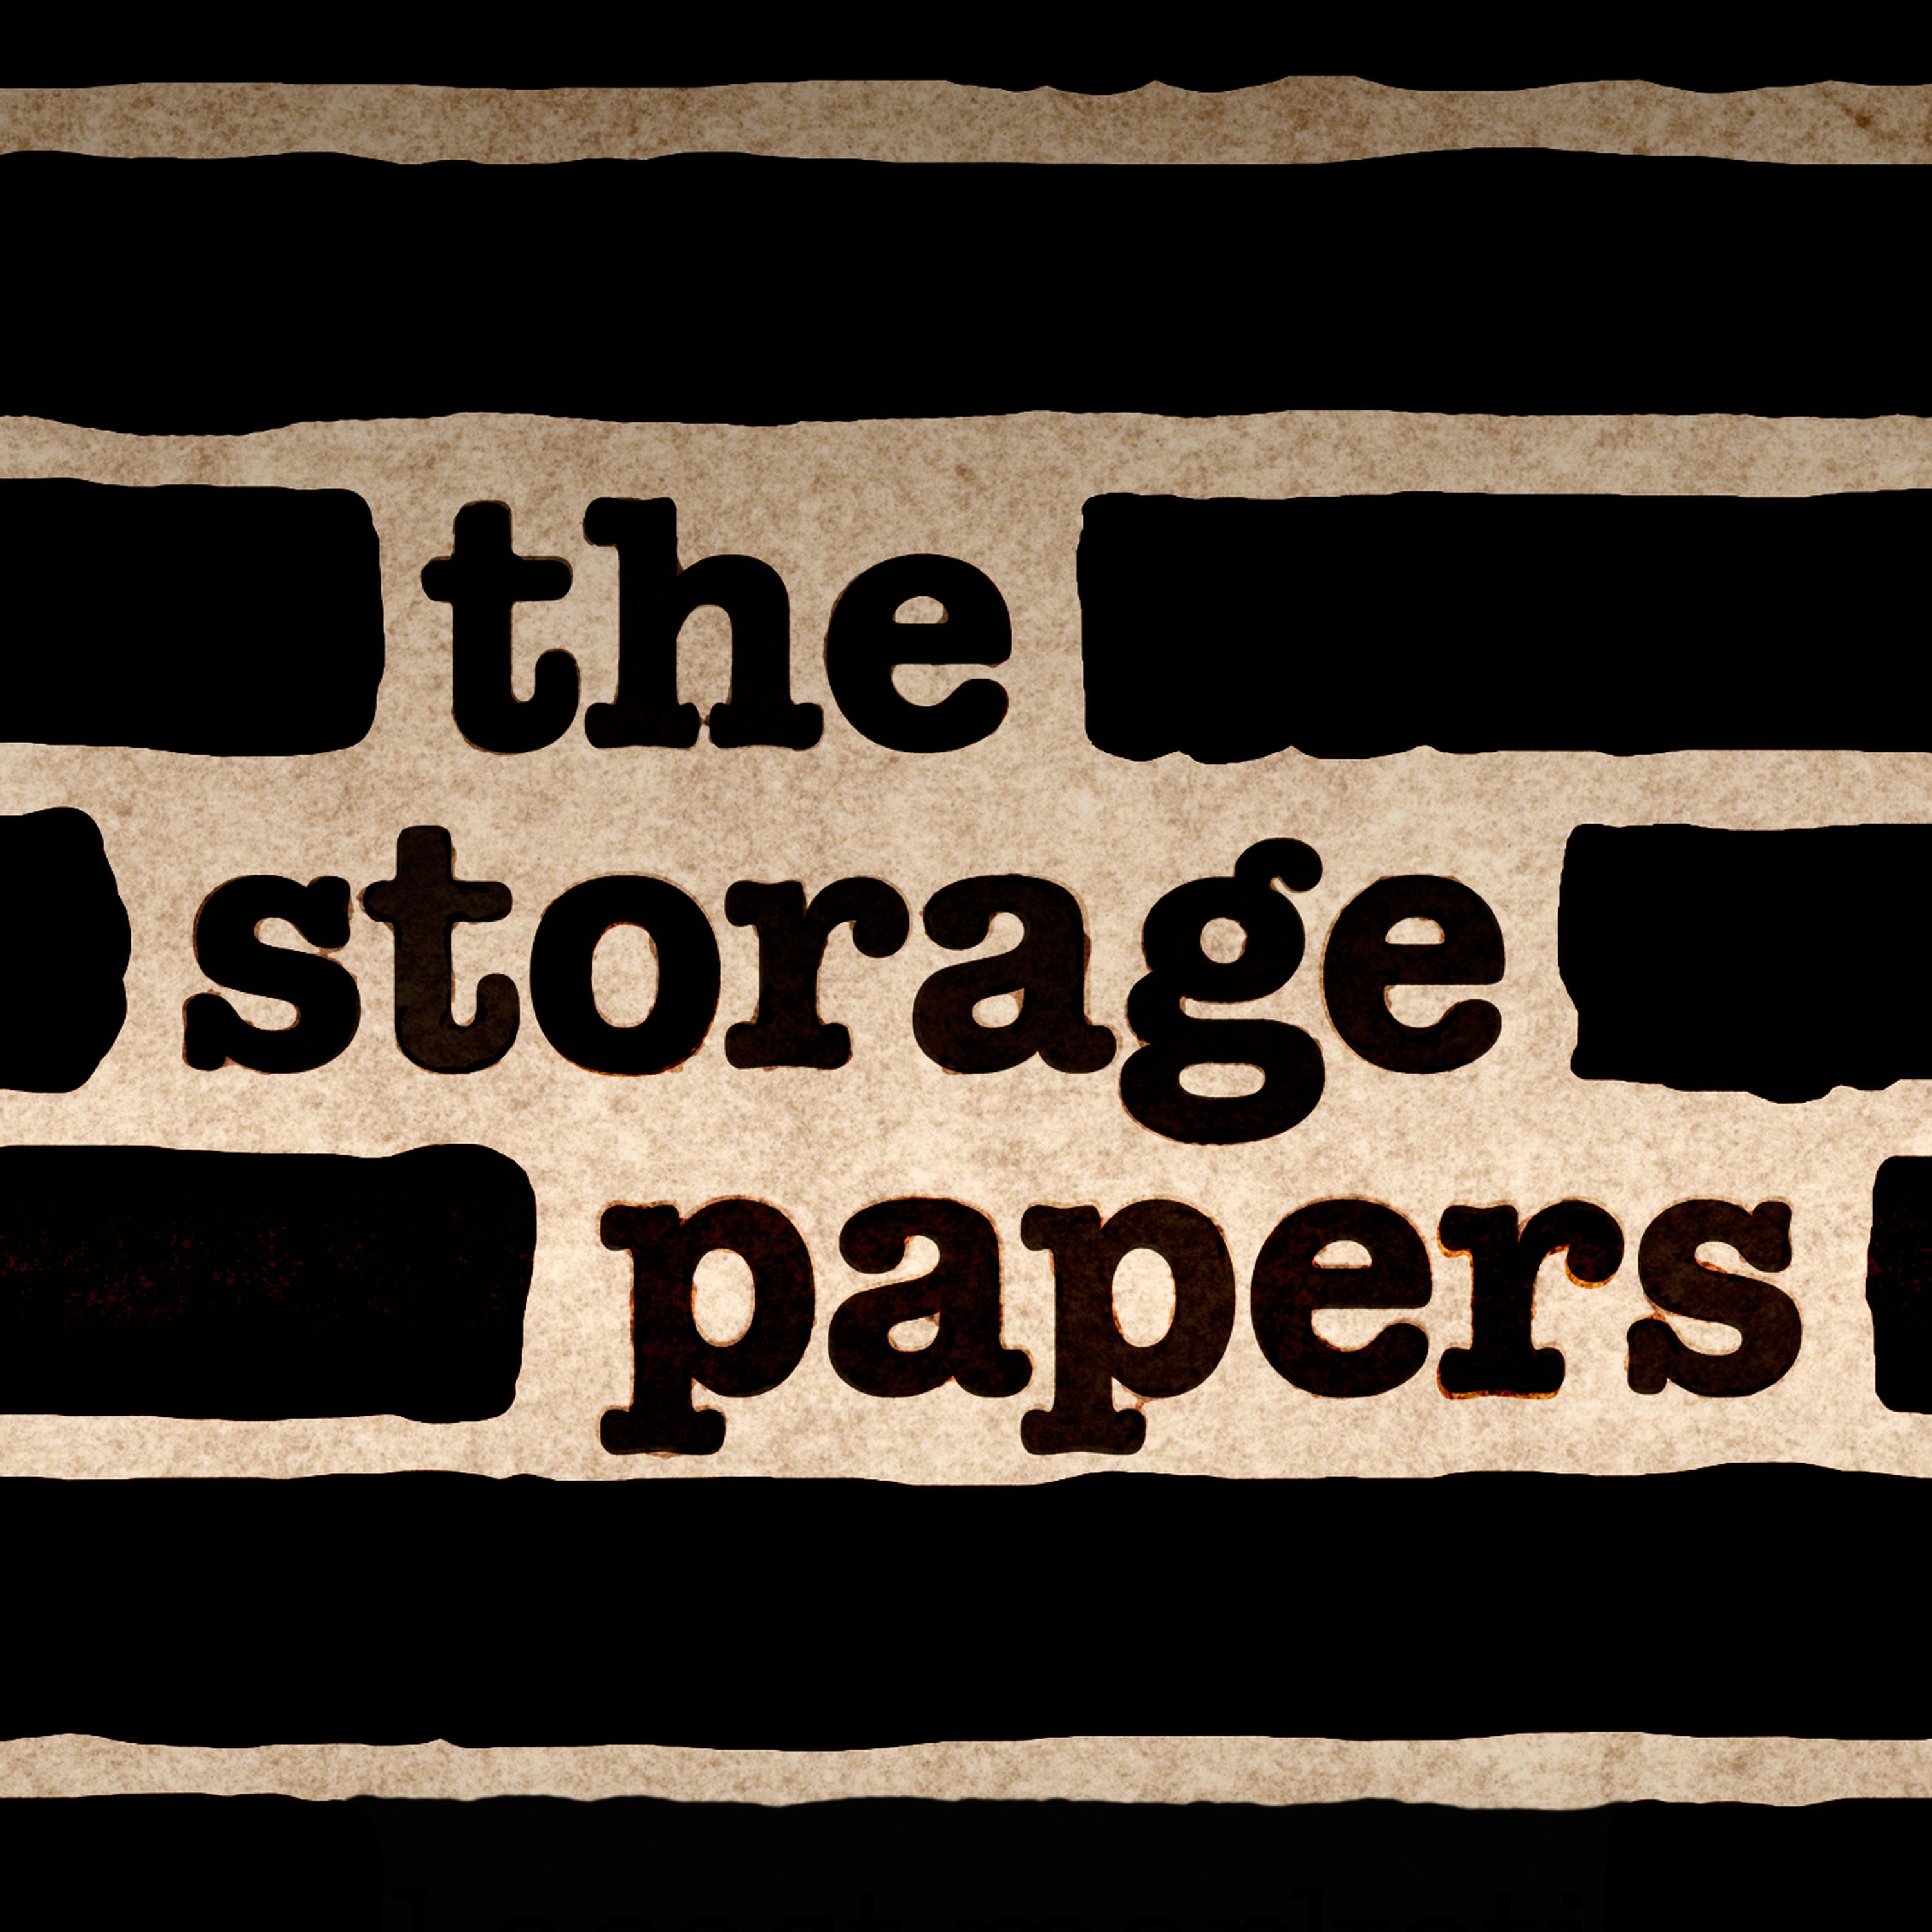 "The Storage Papers" Podcast